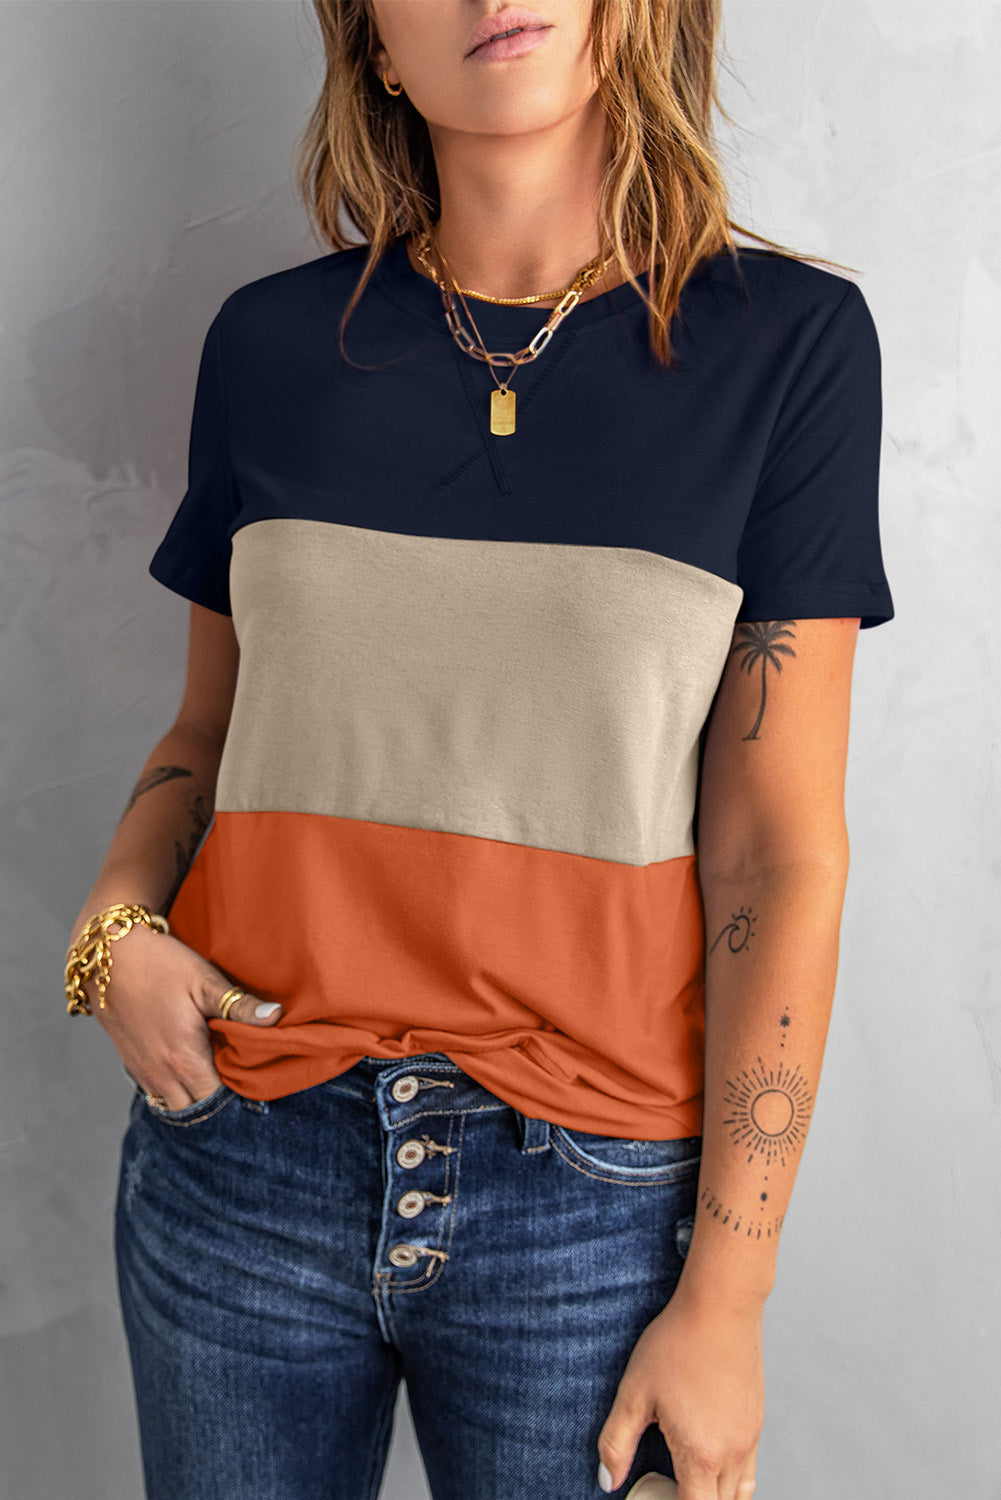 Contrast Colorblock T-shirt $ 20.99 - Evaless